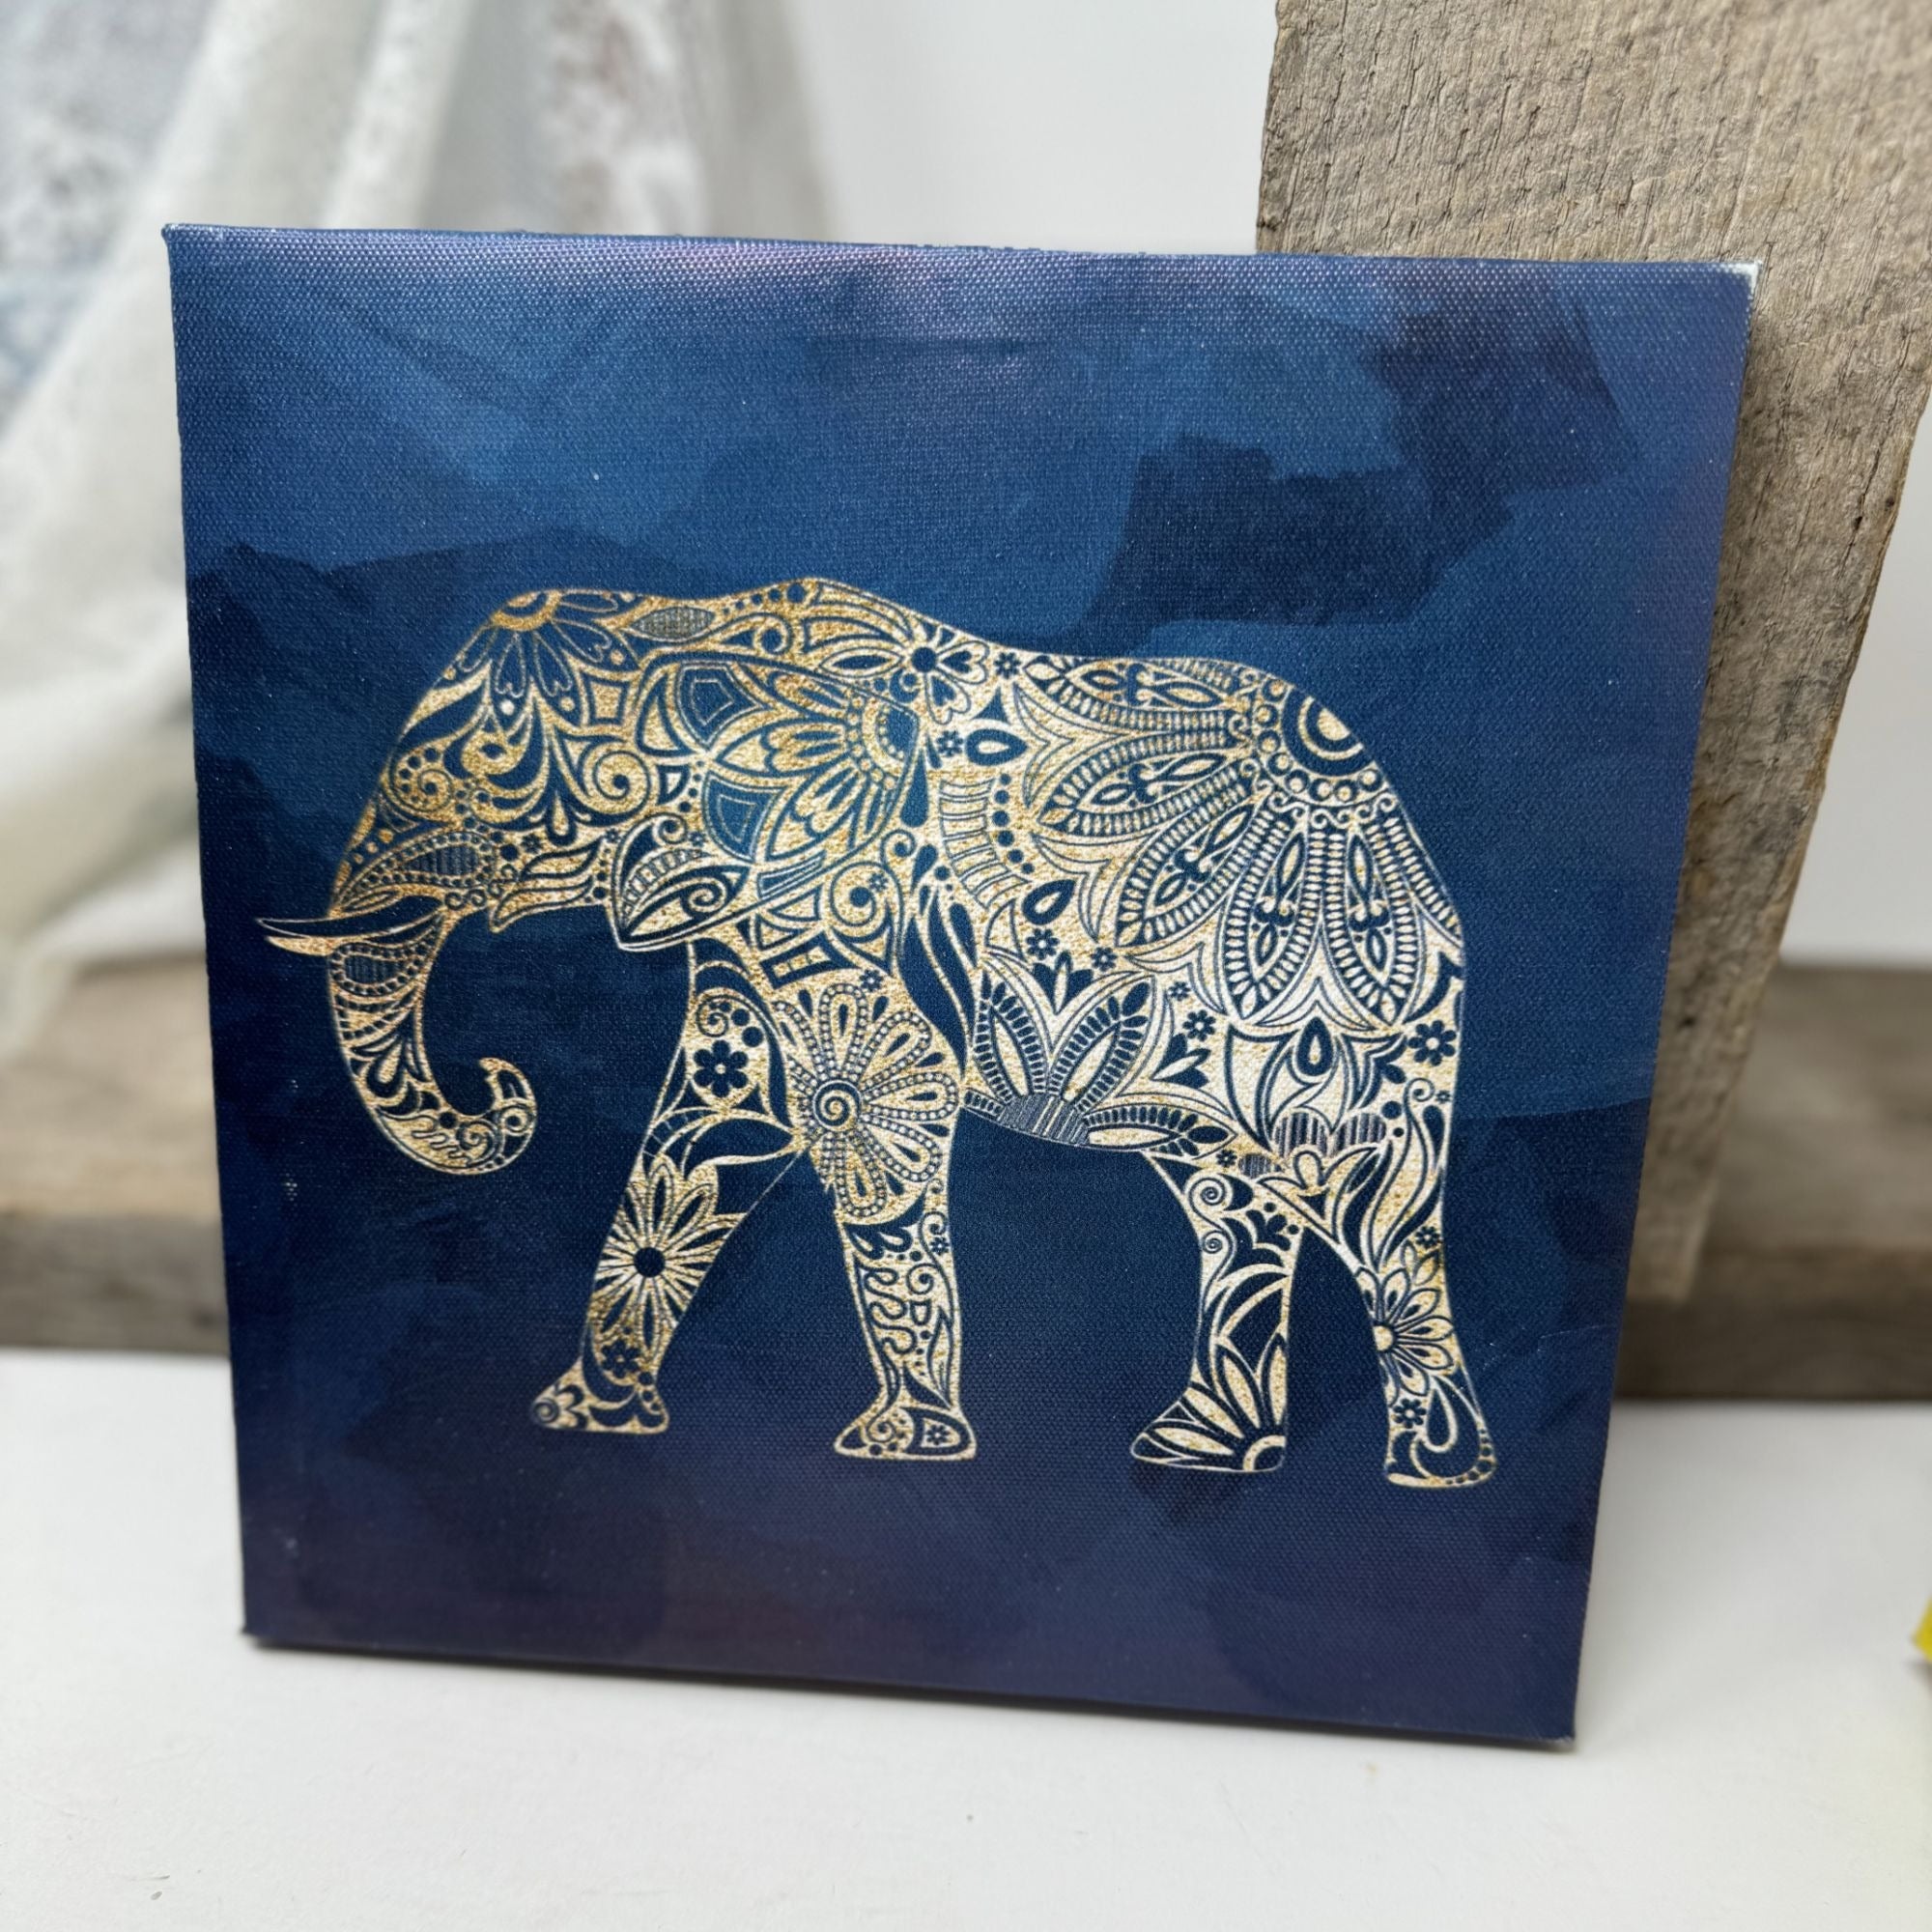 Interesting Painting Of a Elephant 8-1/2" by *-1/2"